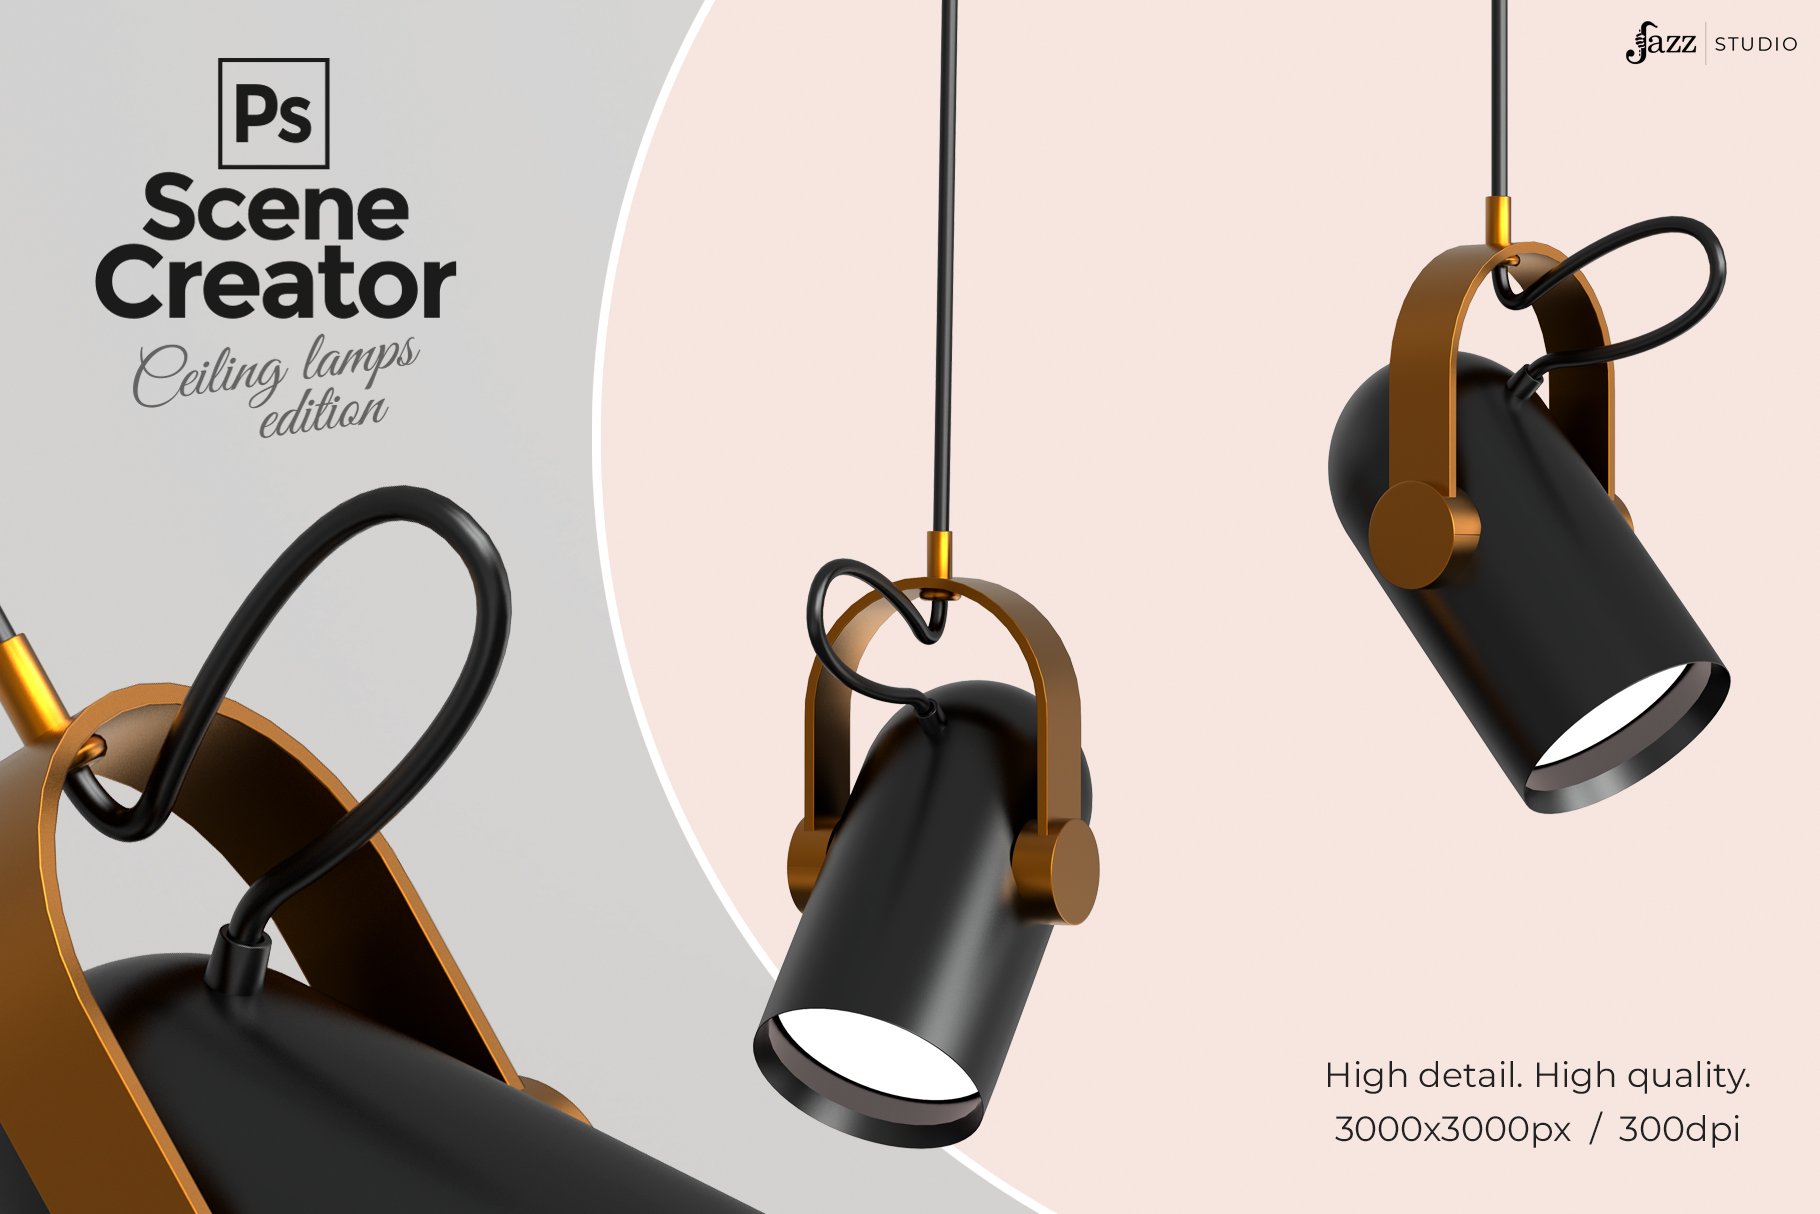 30 PSD scene creator ceiling lamps preview image.